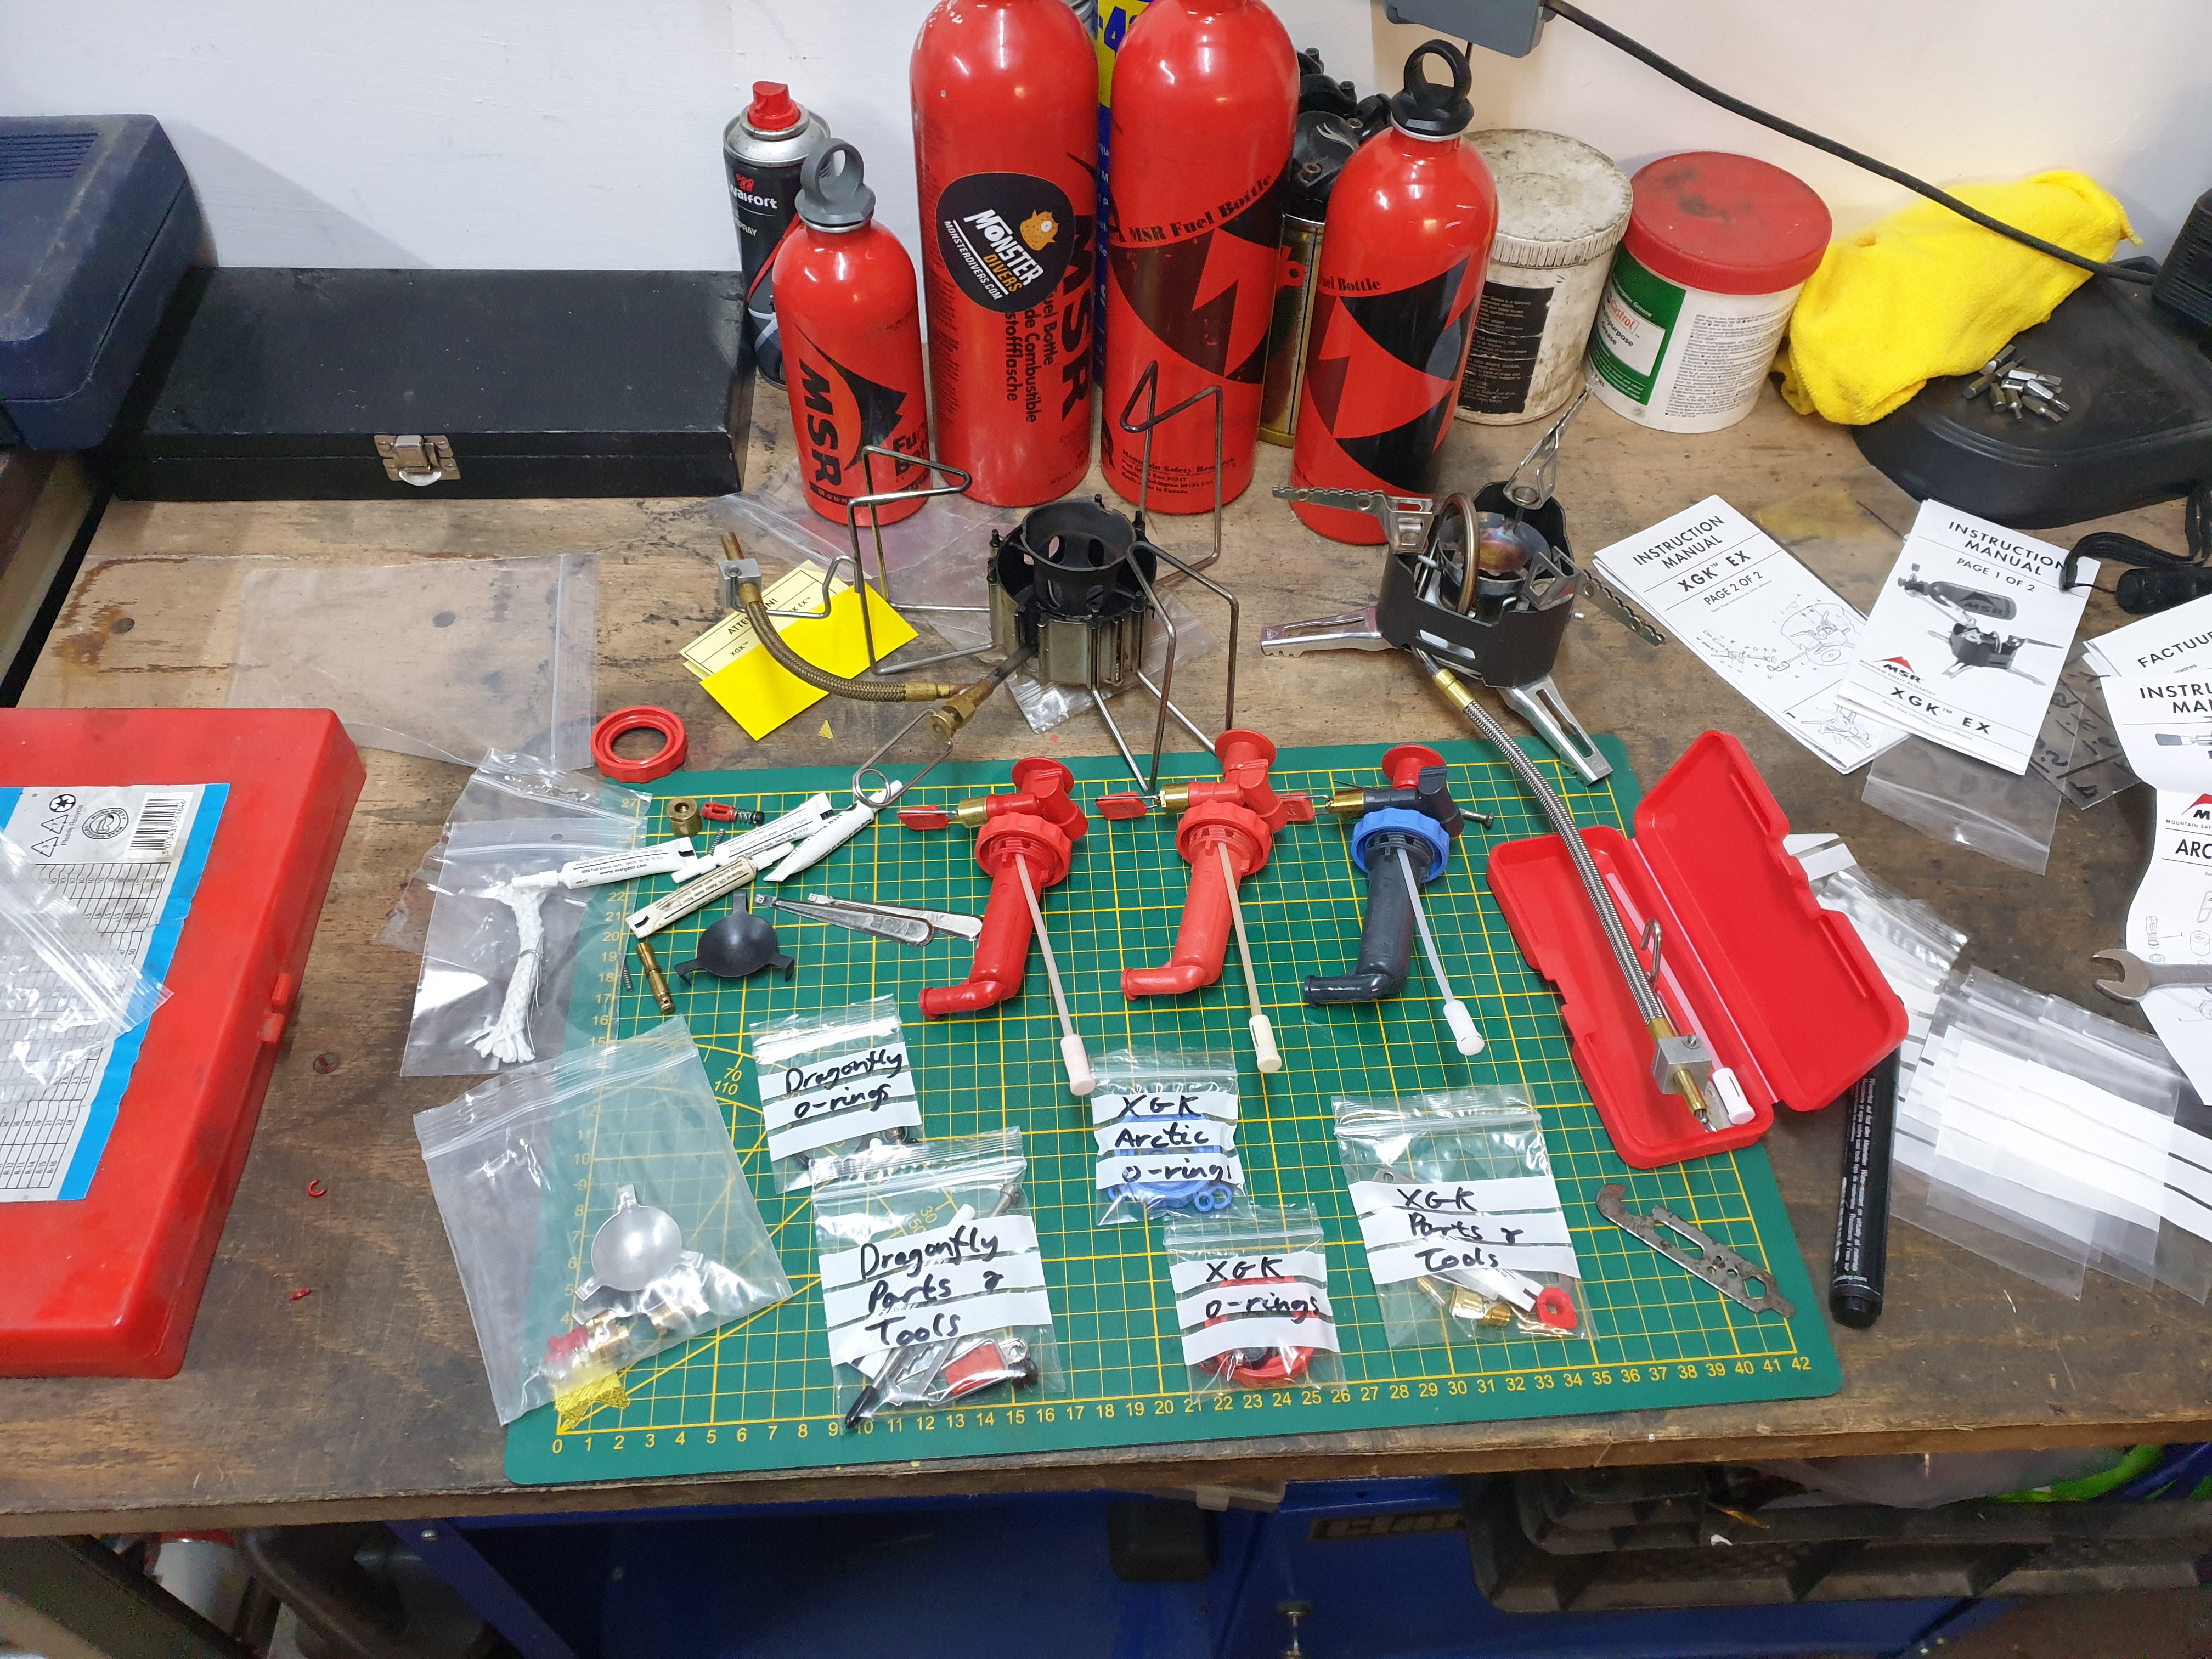 Prepared spares kits and MSR stove components